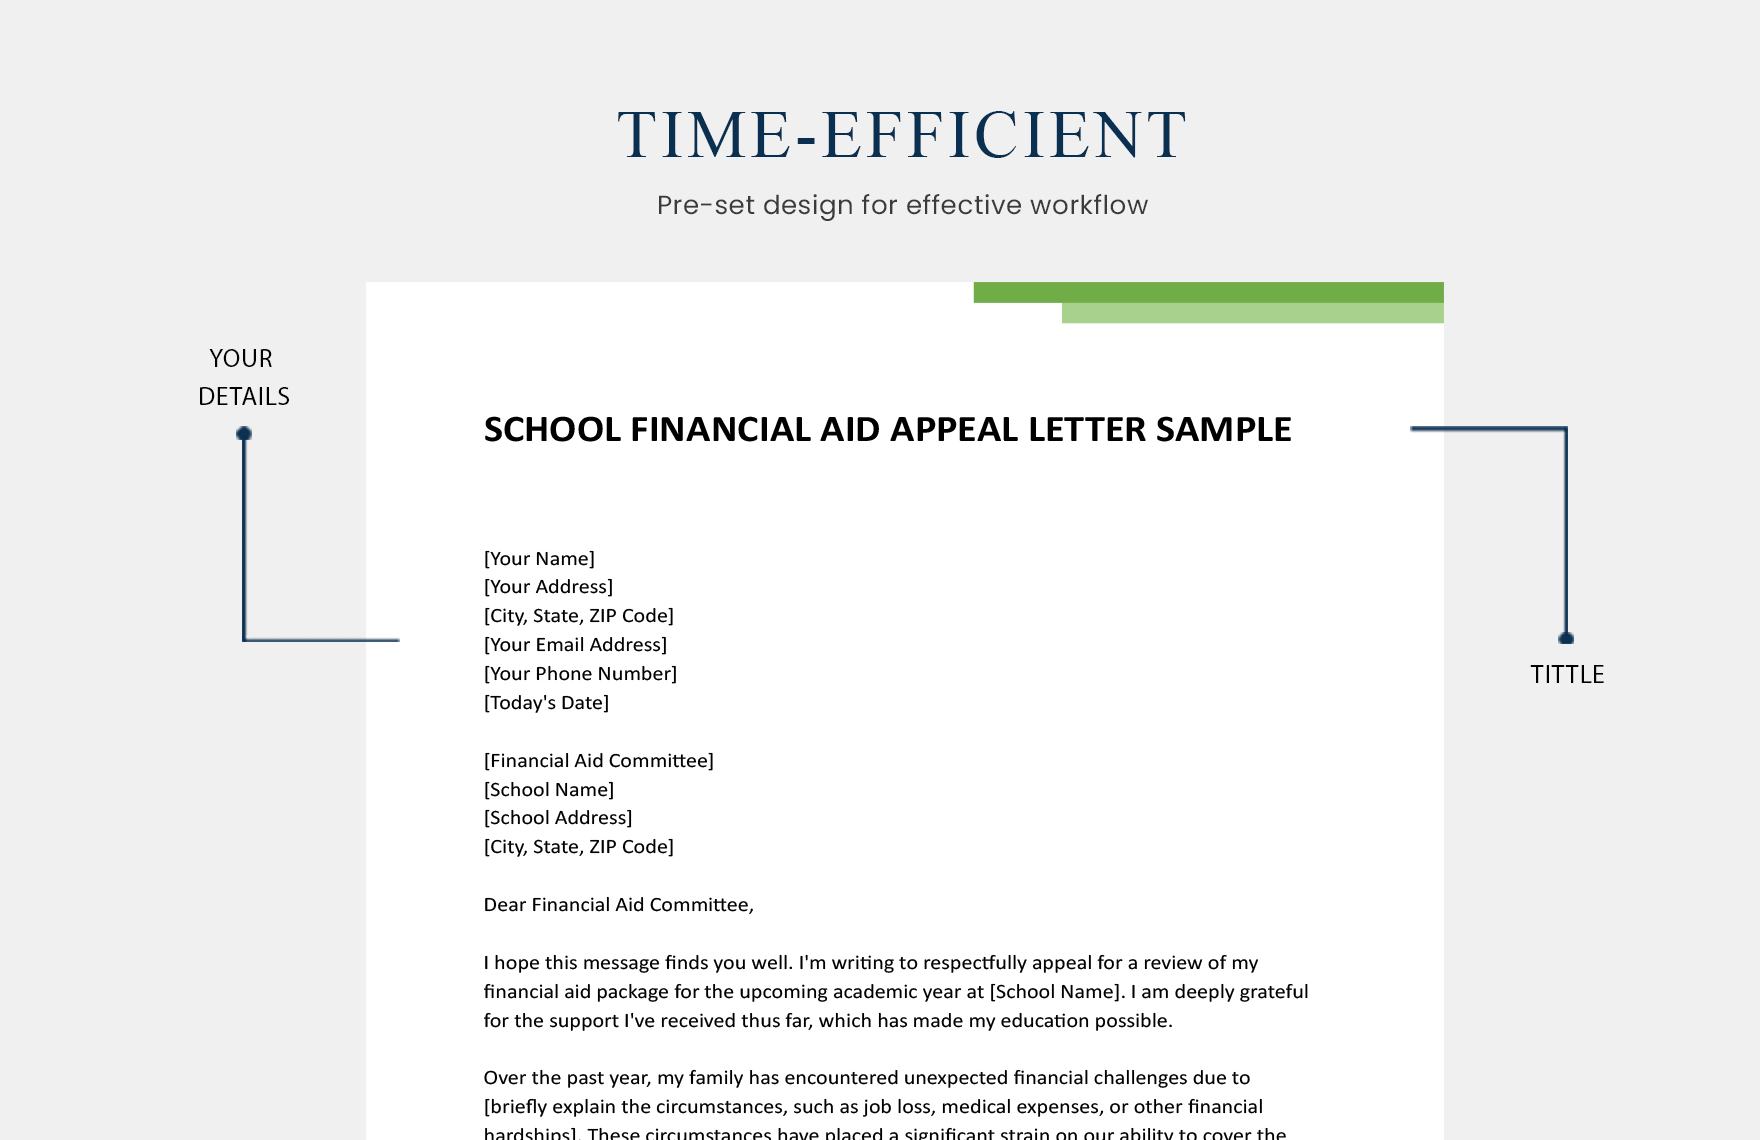 School Financial Aid Appeal Letter Sample